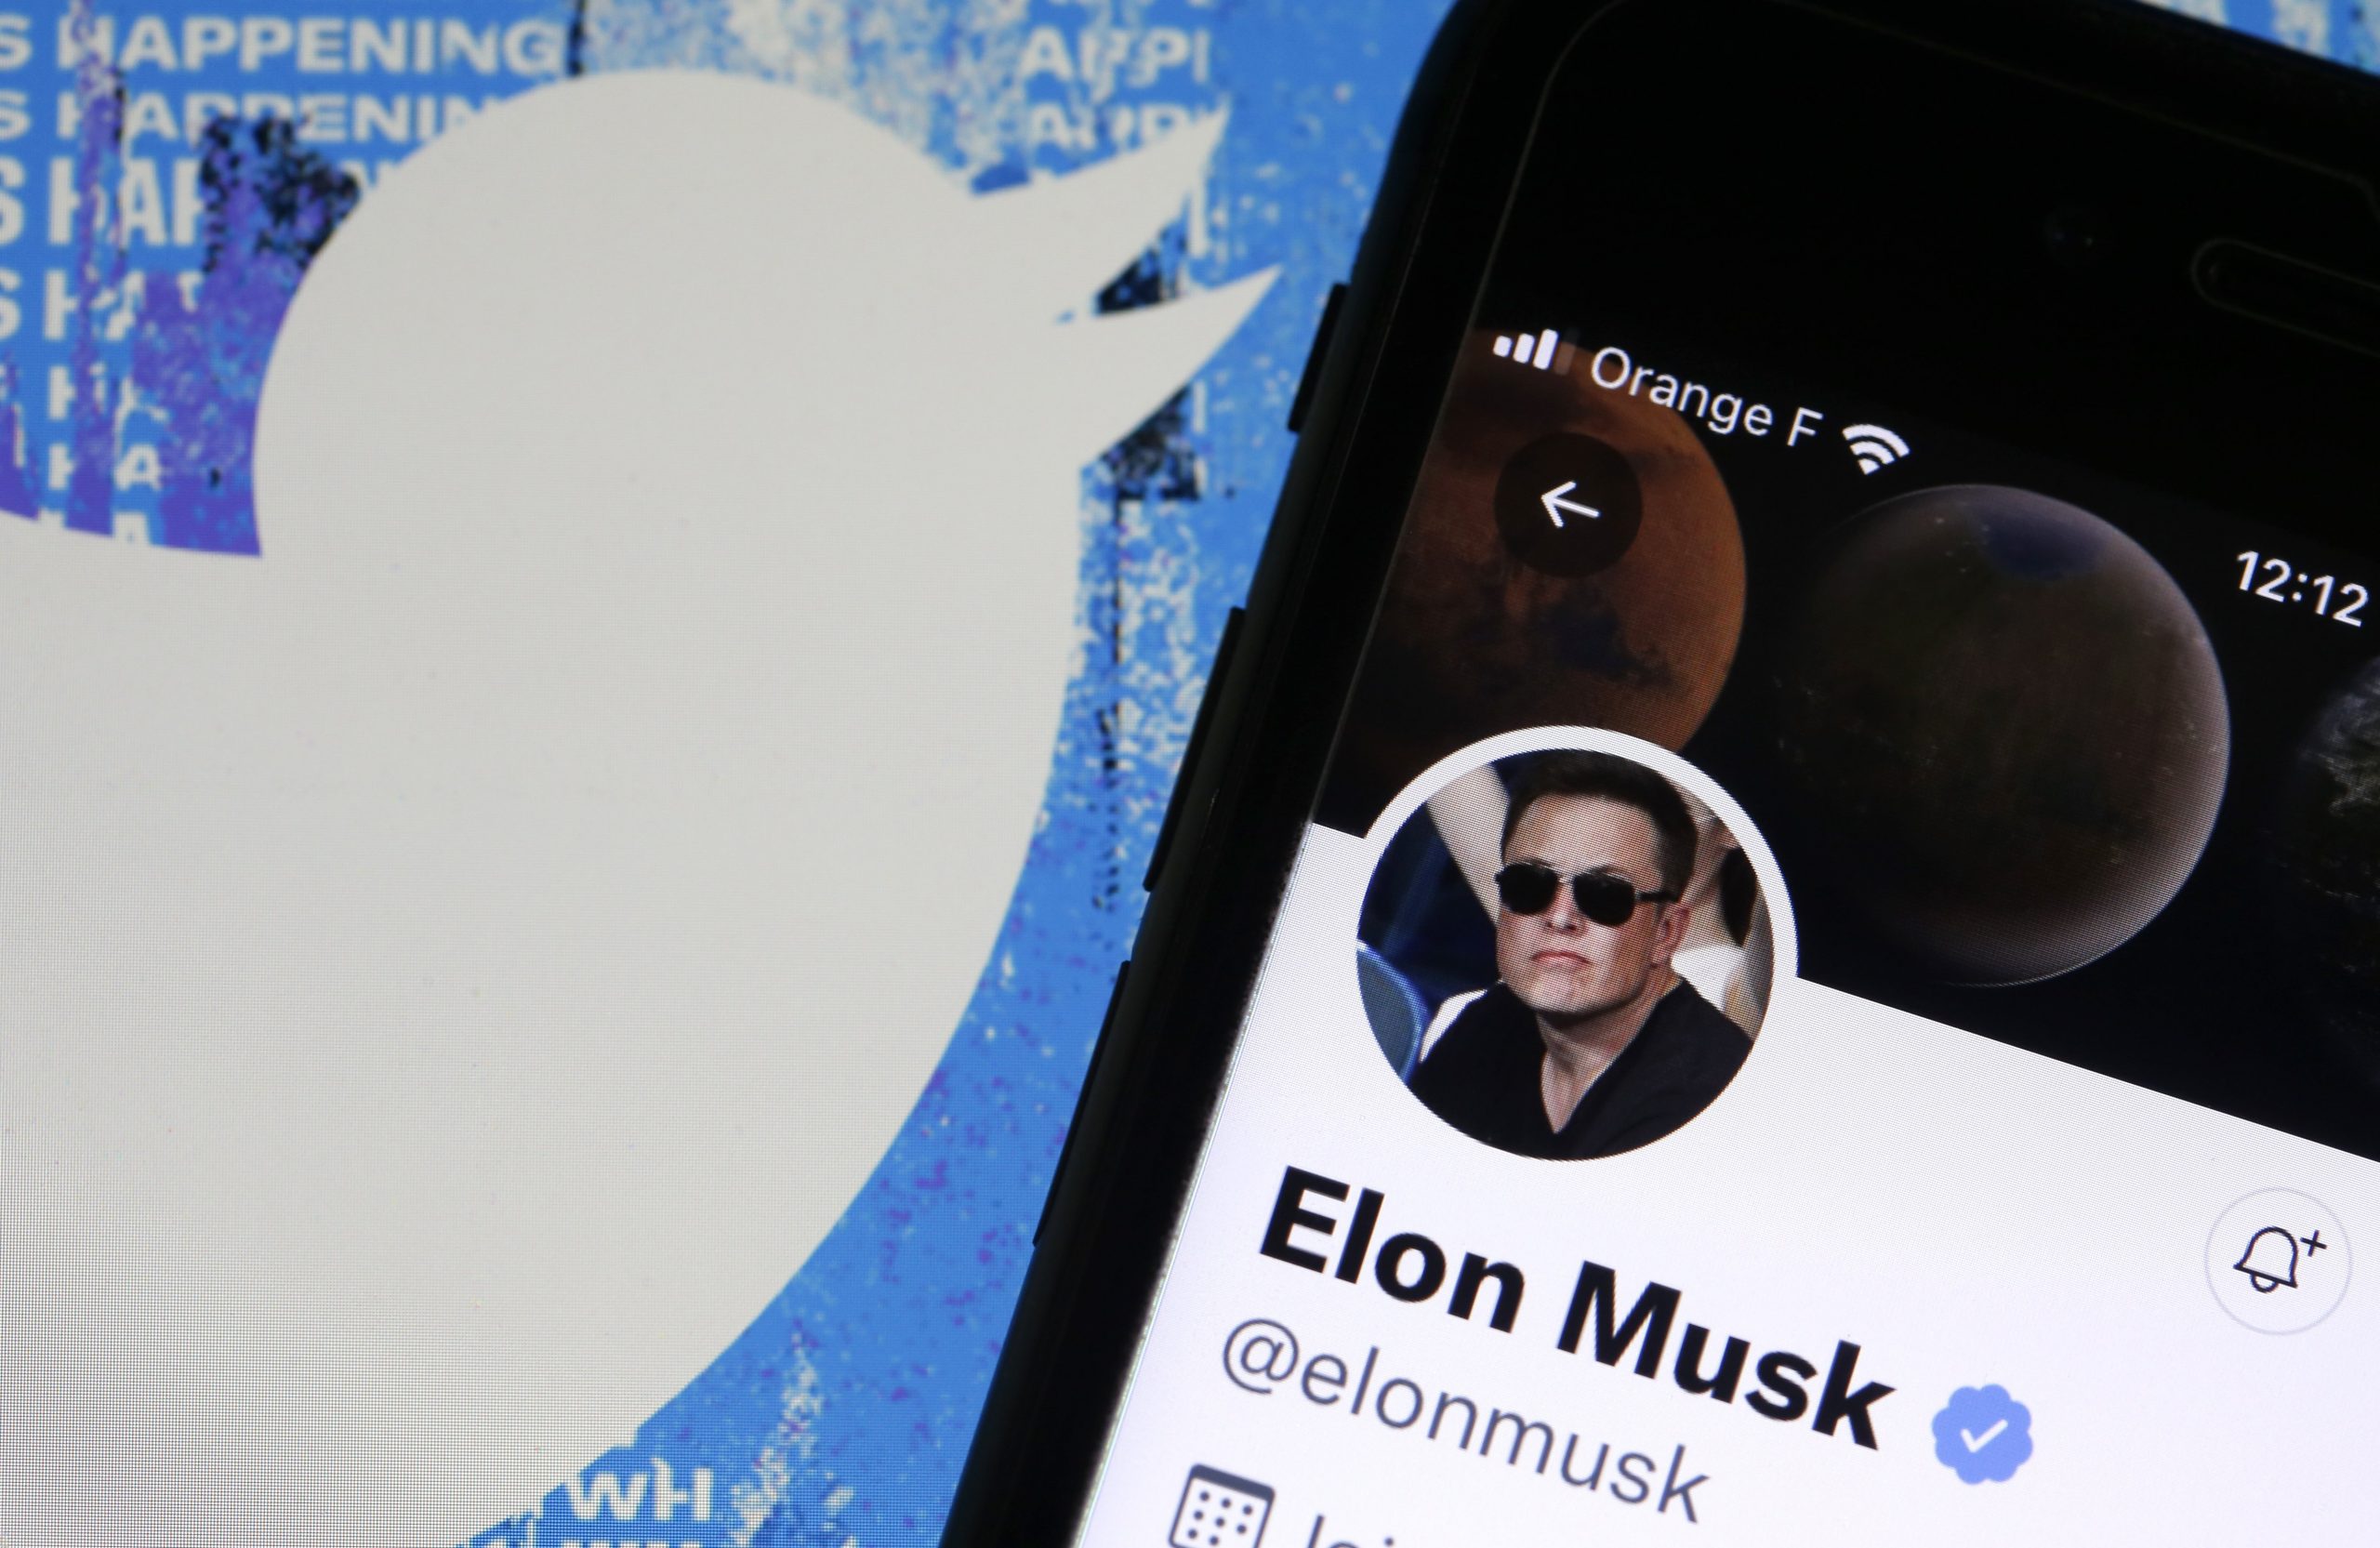 No, Elon Musk. There’s no conspiracy behind low engagement on Twitter. It’s summer.